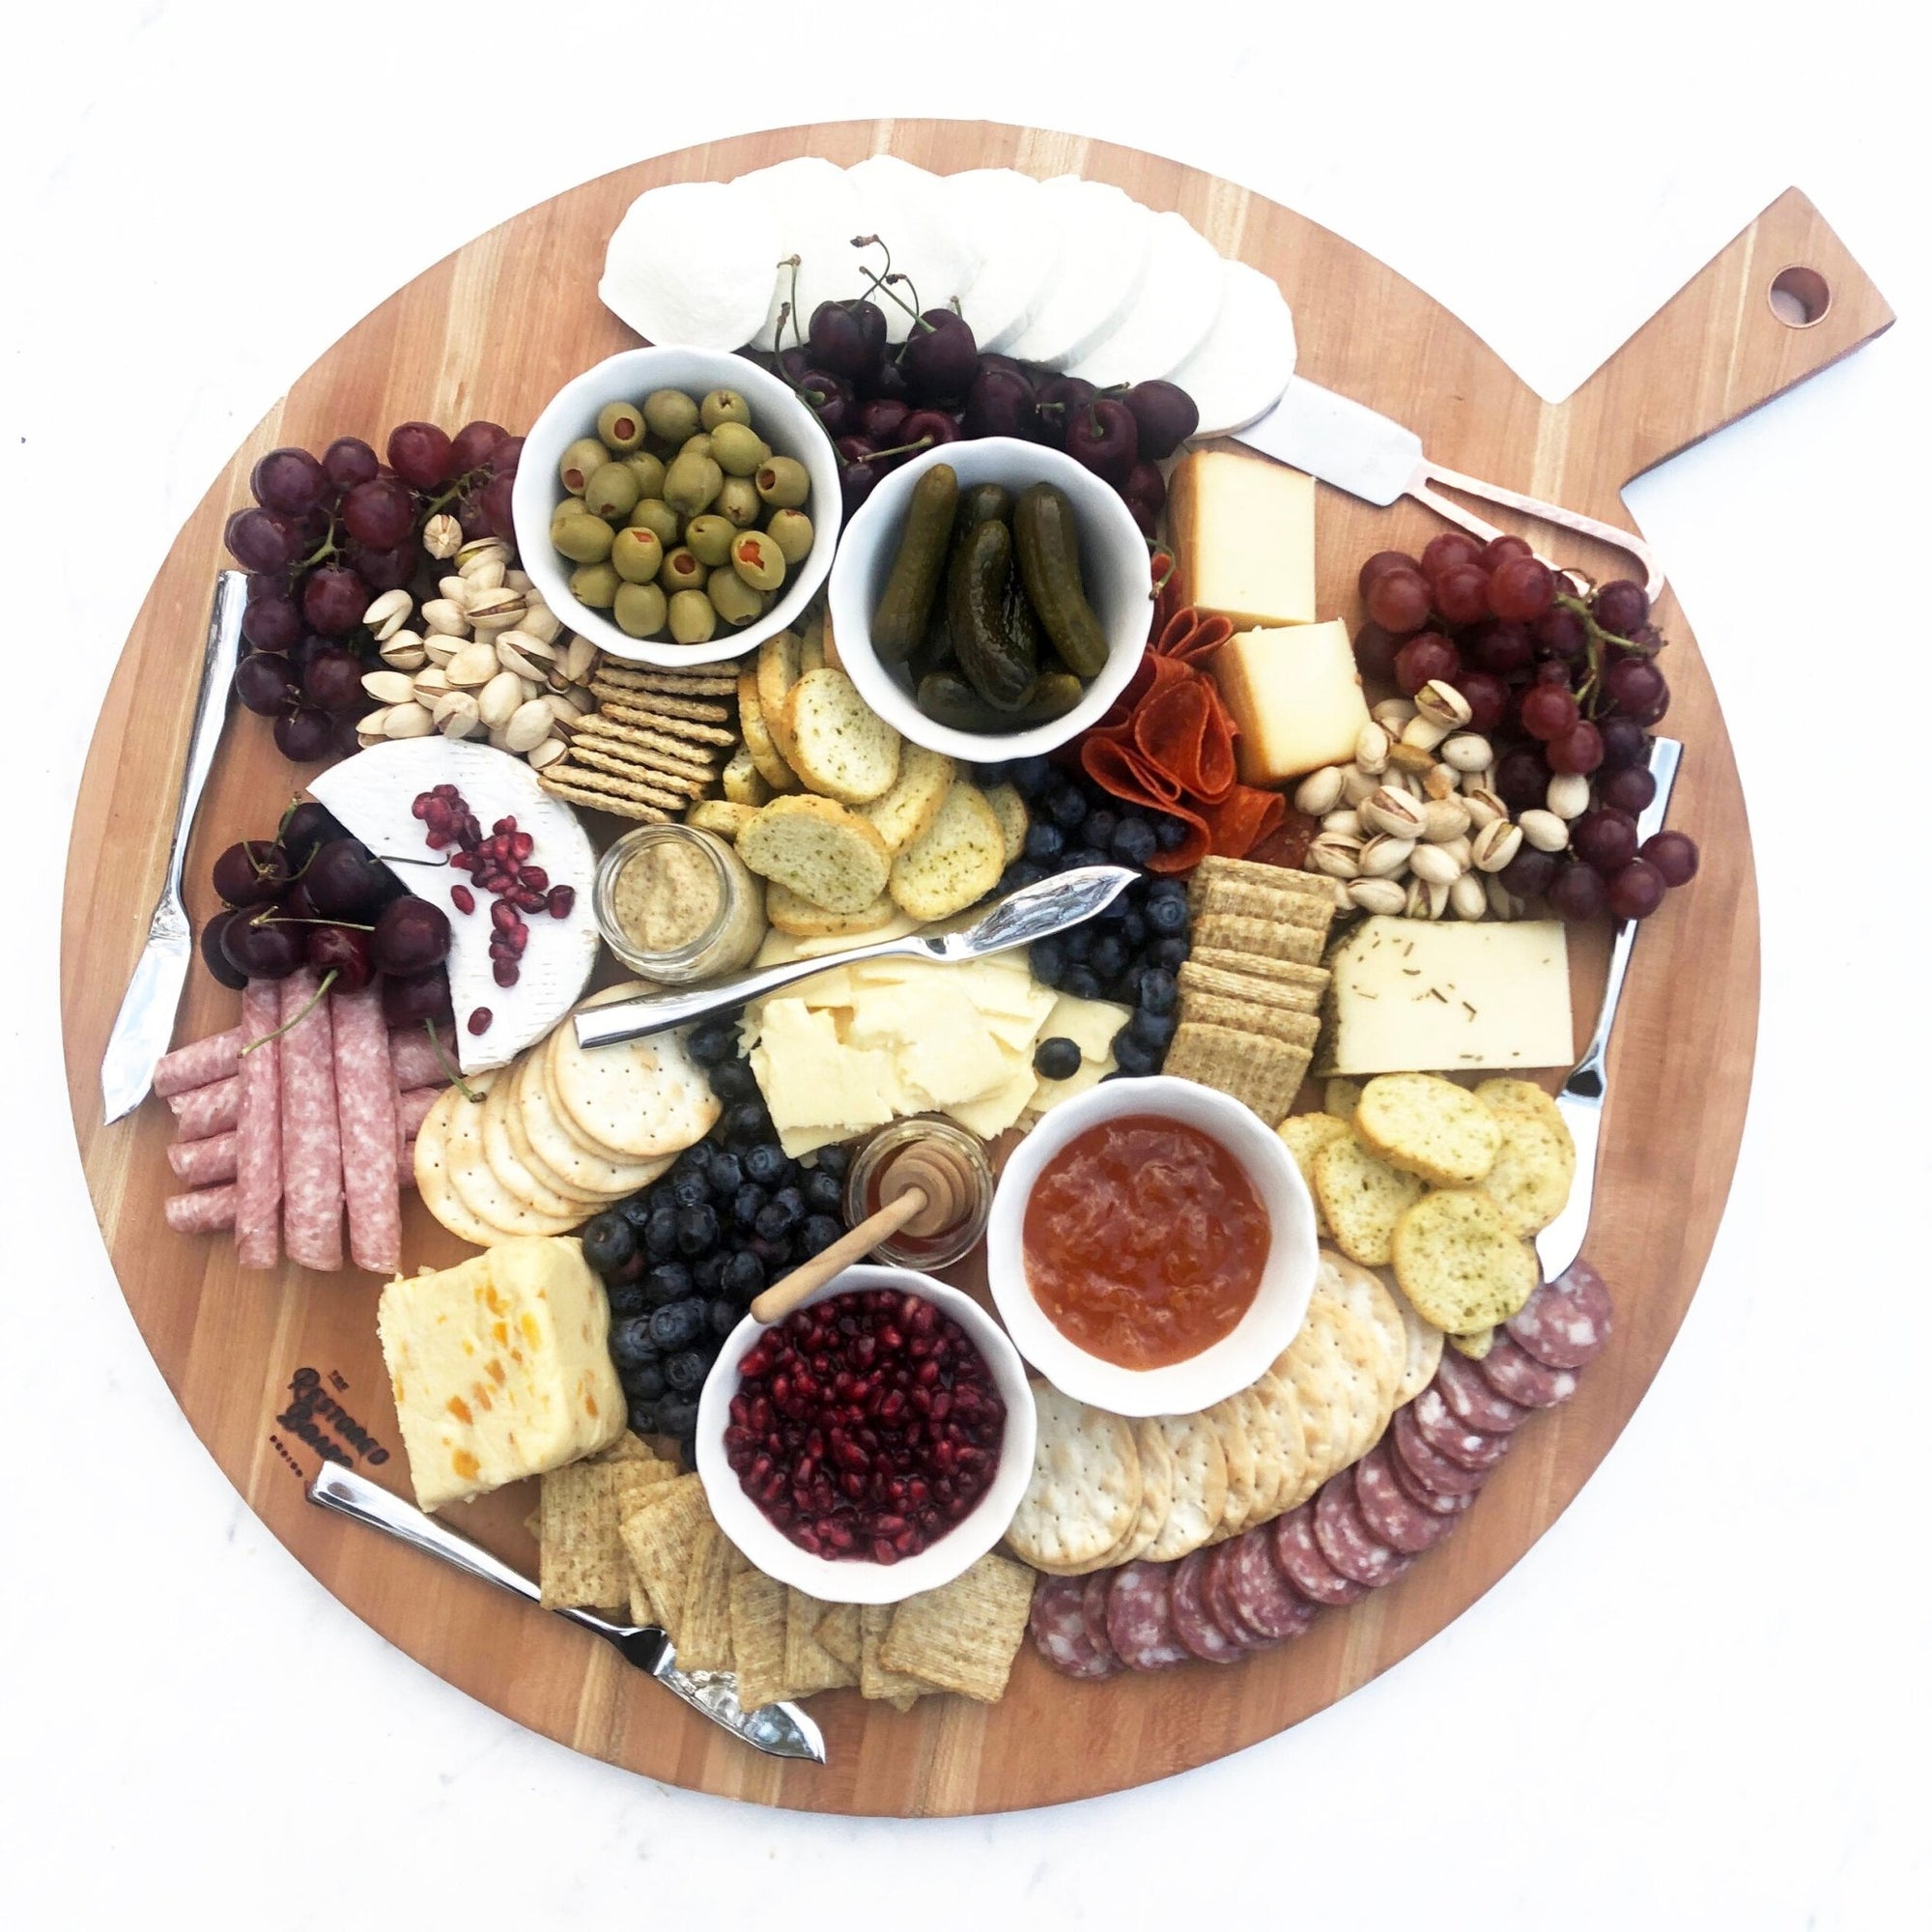 7 Easy Steps To Constructing A Charcuterie Board - Essentially Charleston